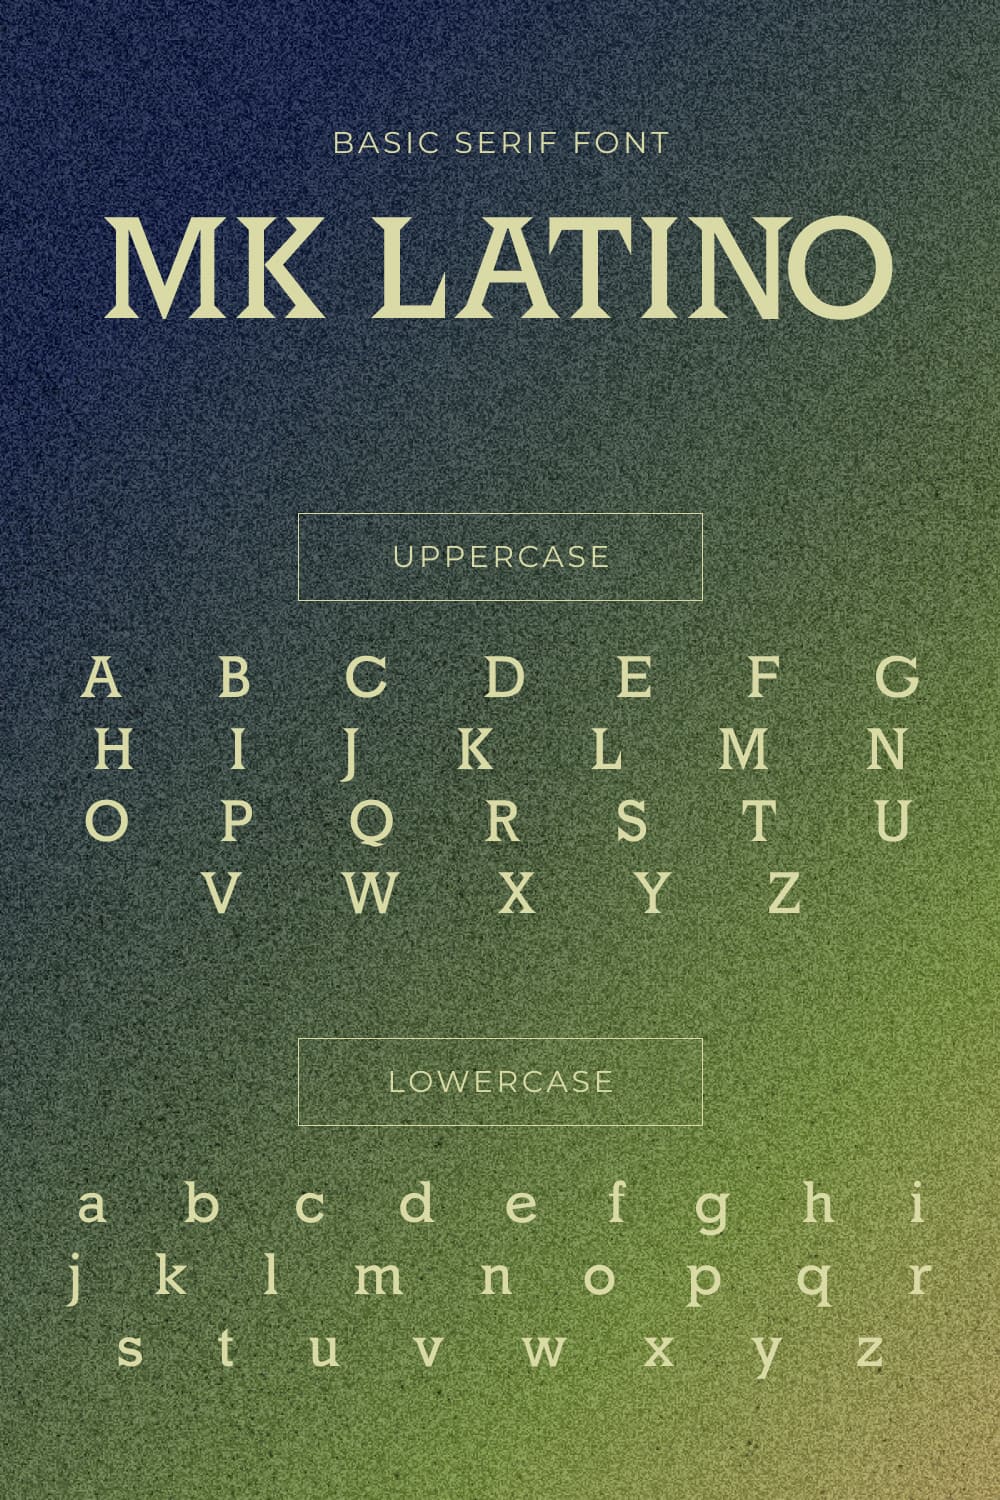 An example of a Mk Latino font in green on a gradient black and green background.